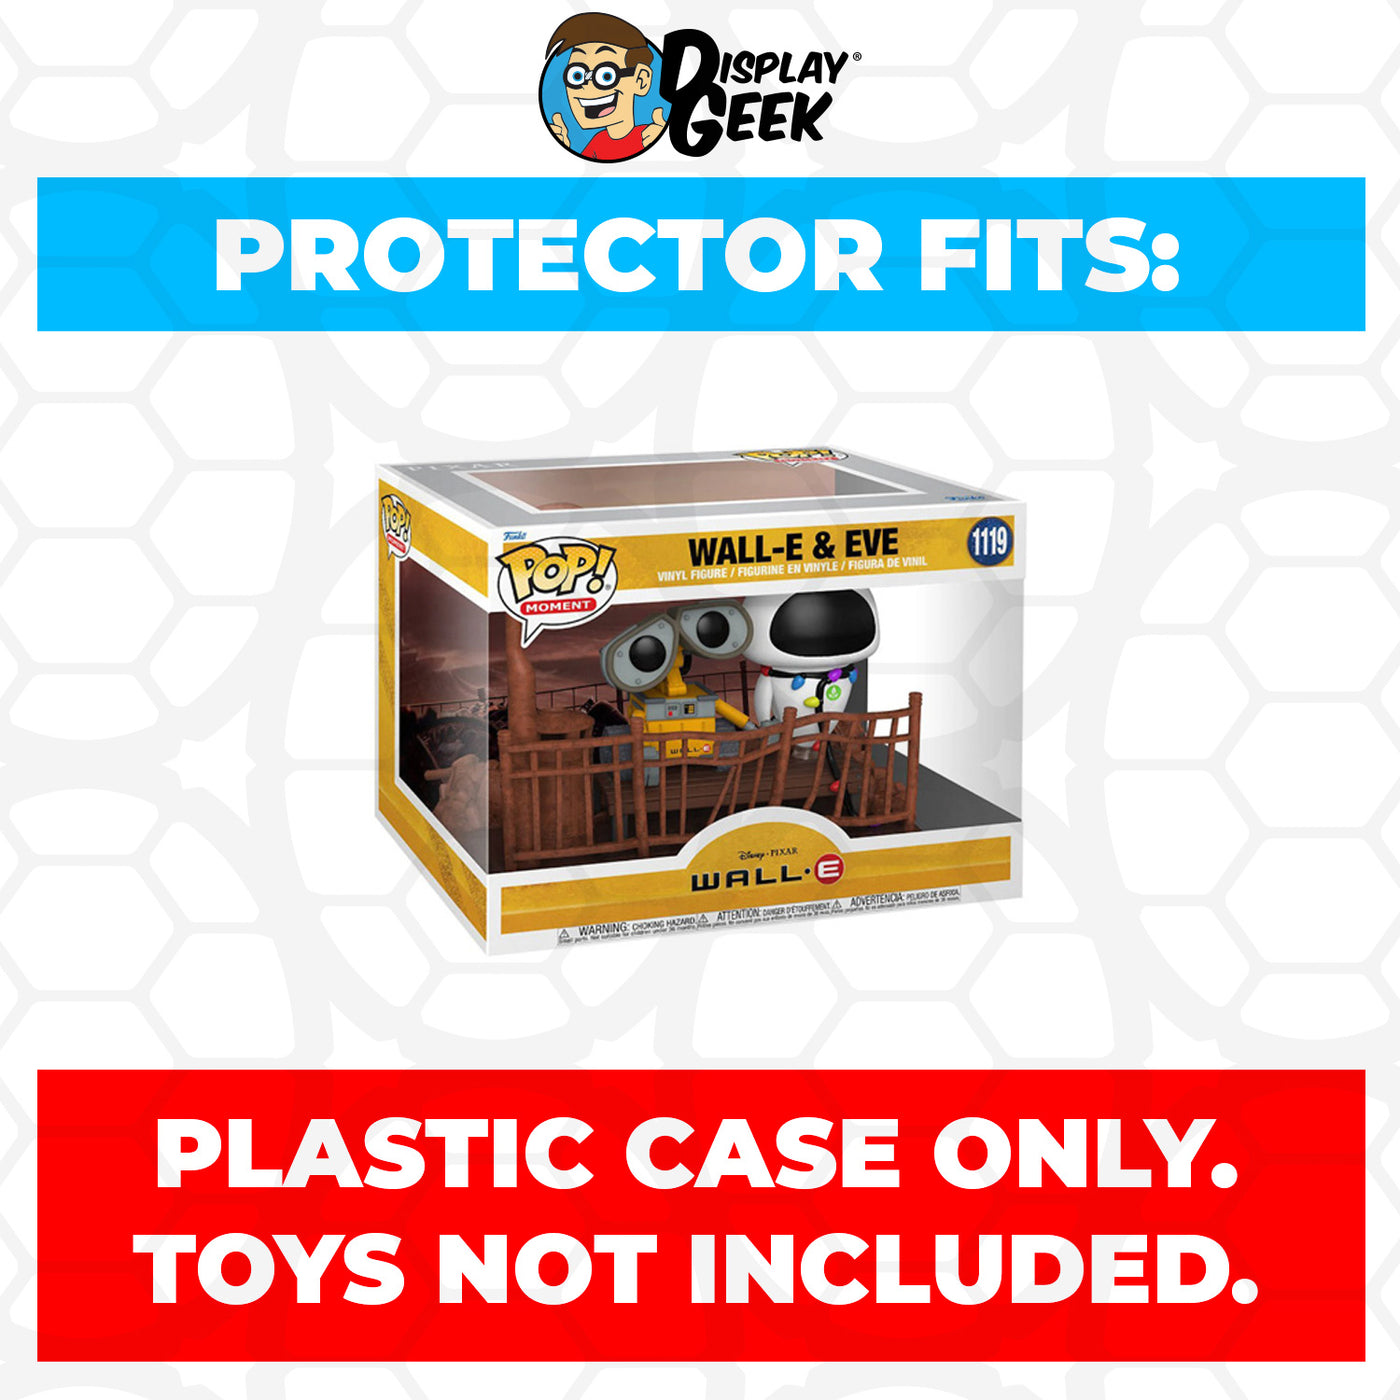 Pop Protector for Wall-E & Eve #1119 Funko Pop Moment on The Protector Guide App by Display Geek